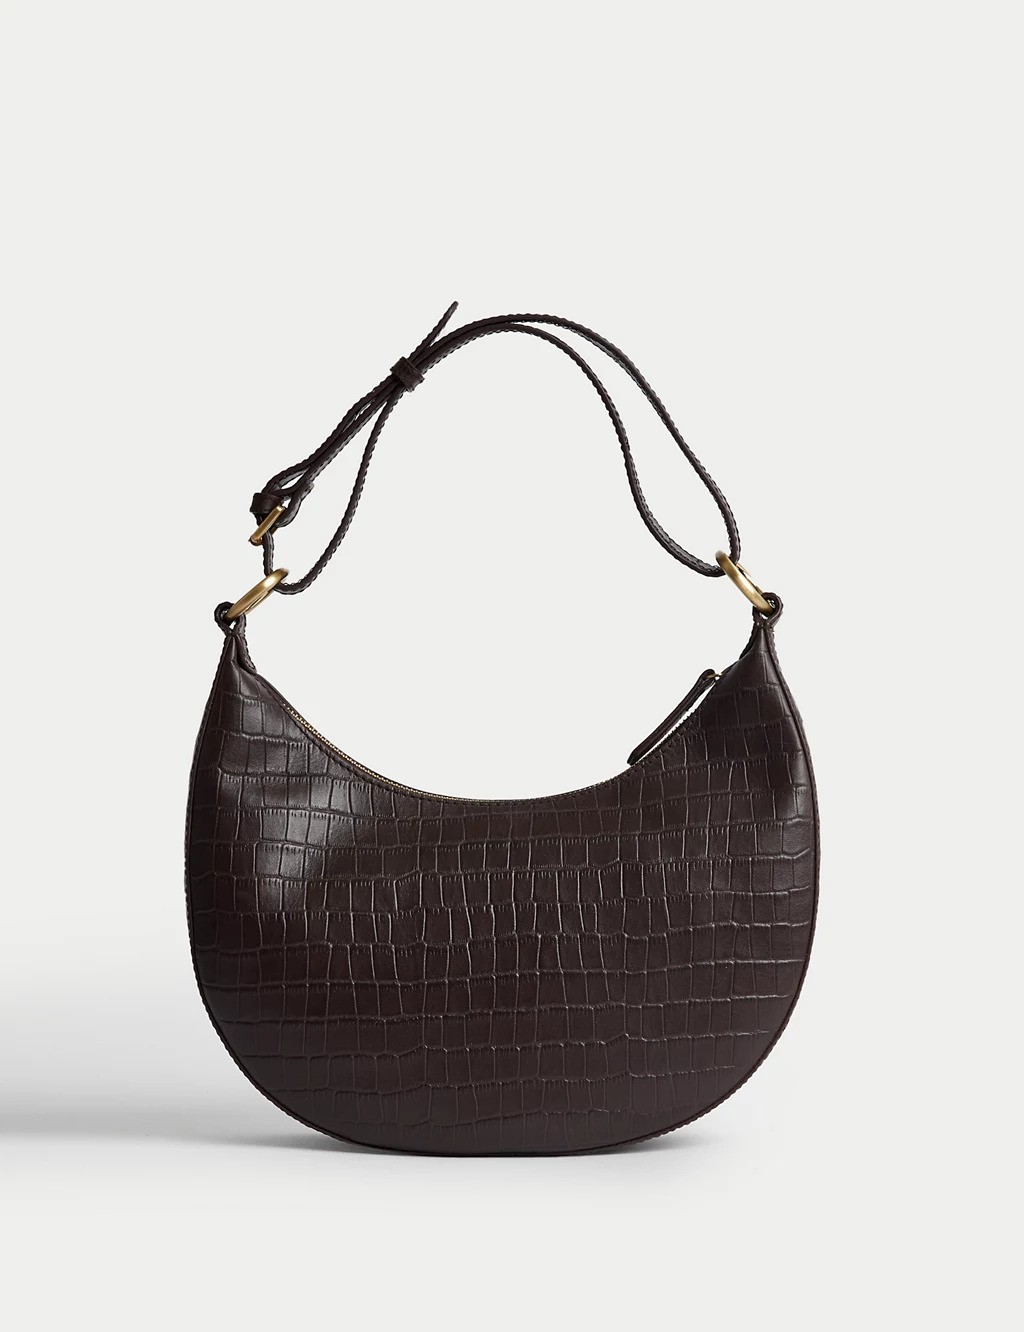 M&S Sequence + Leather-based mostly Croc Attain Shoulder Glean